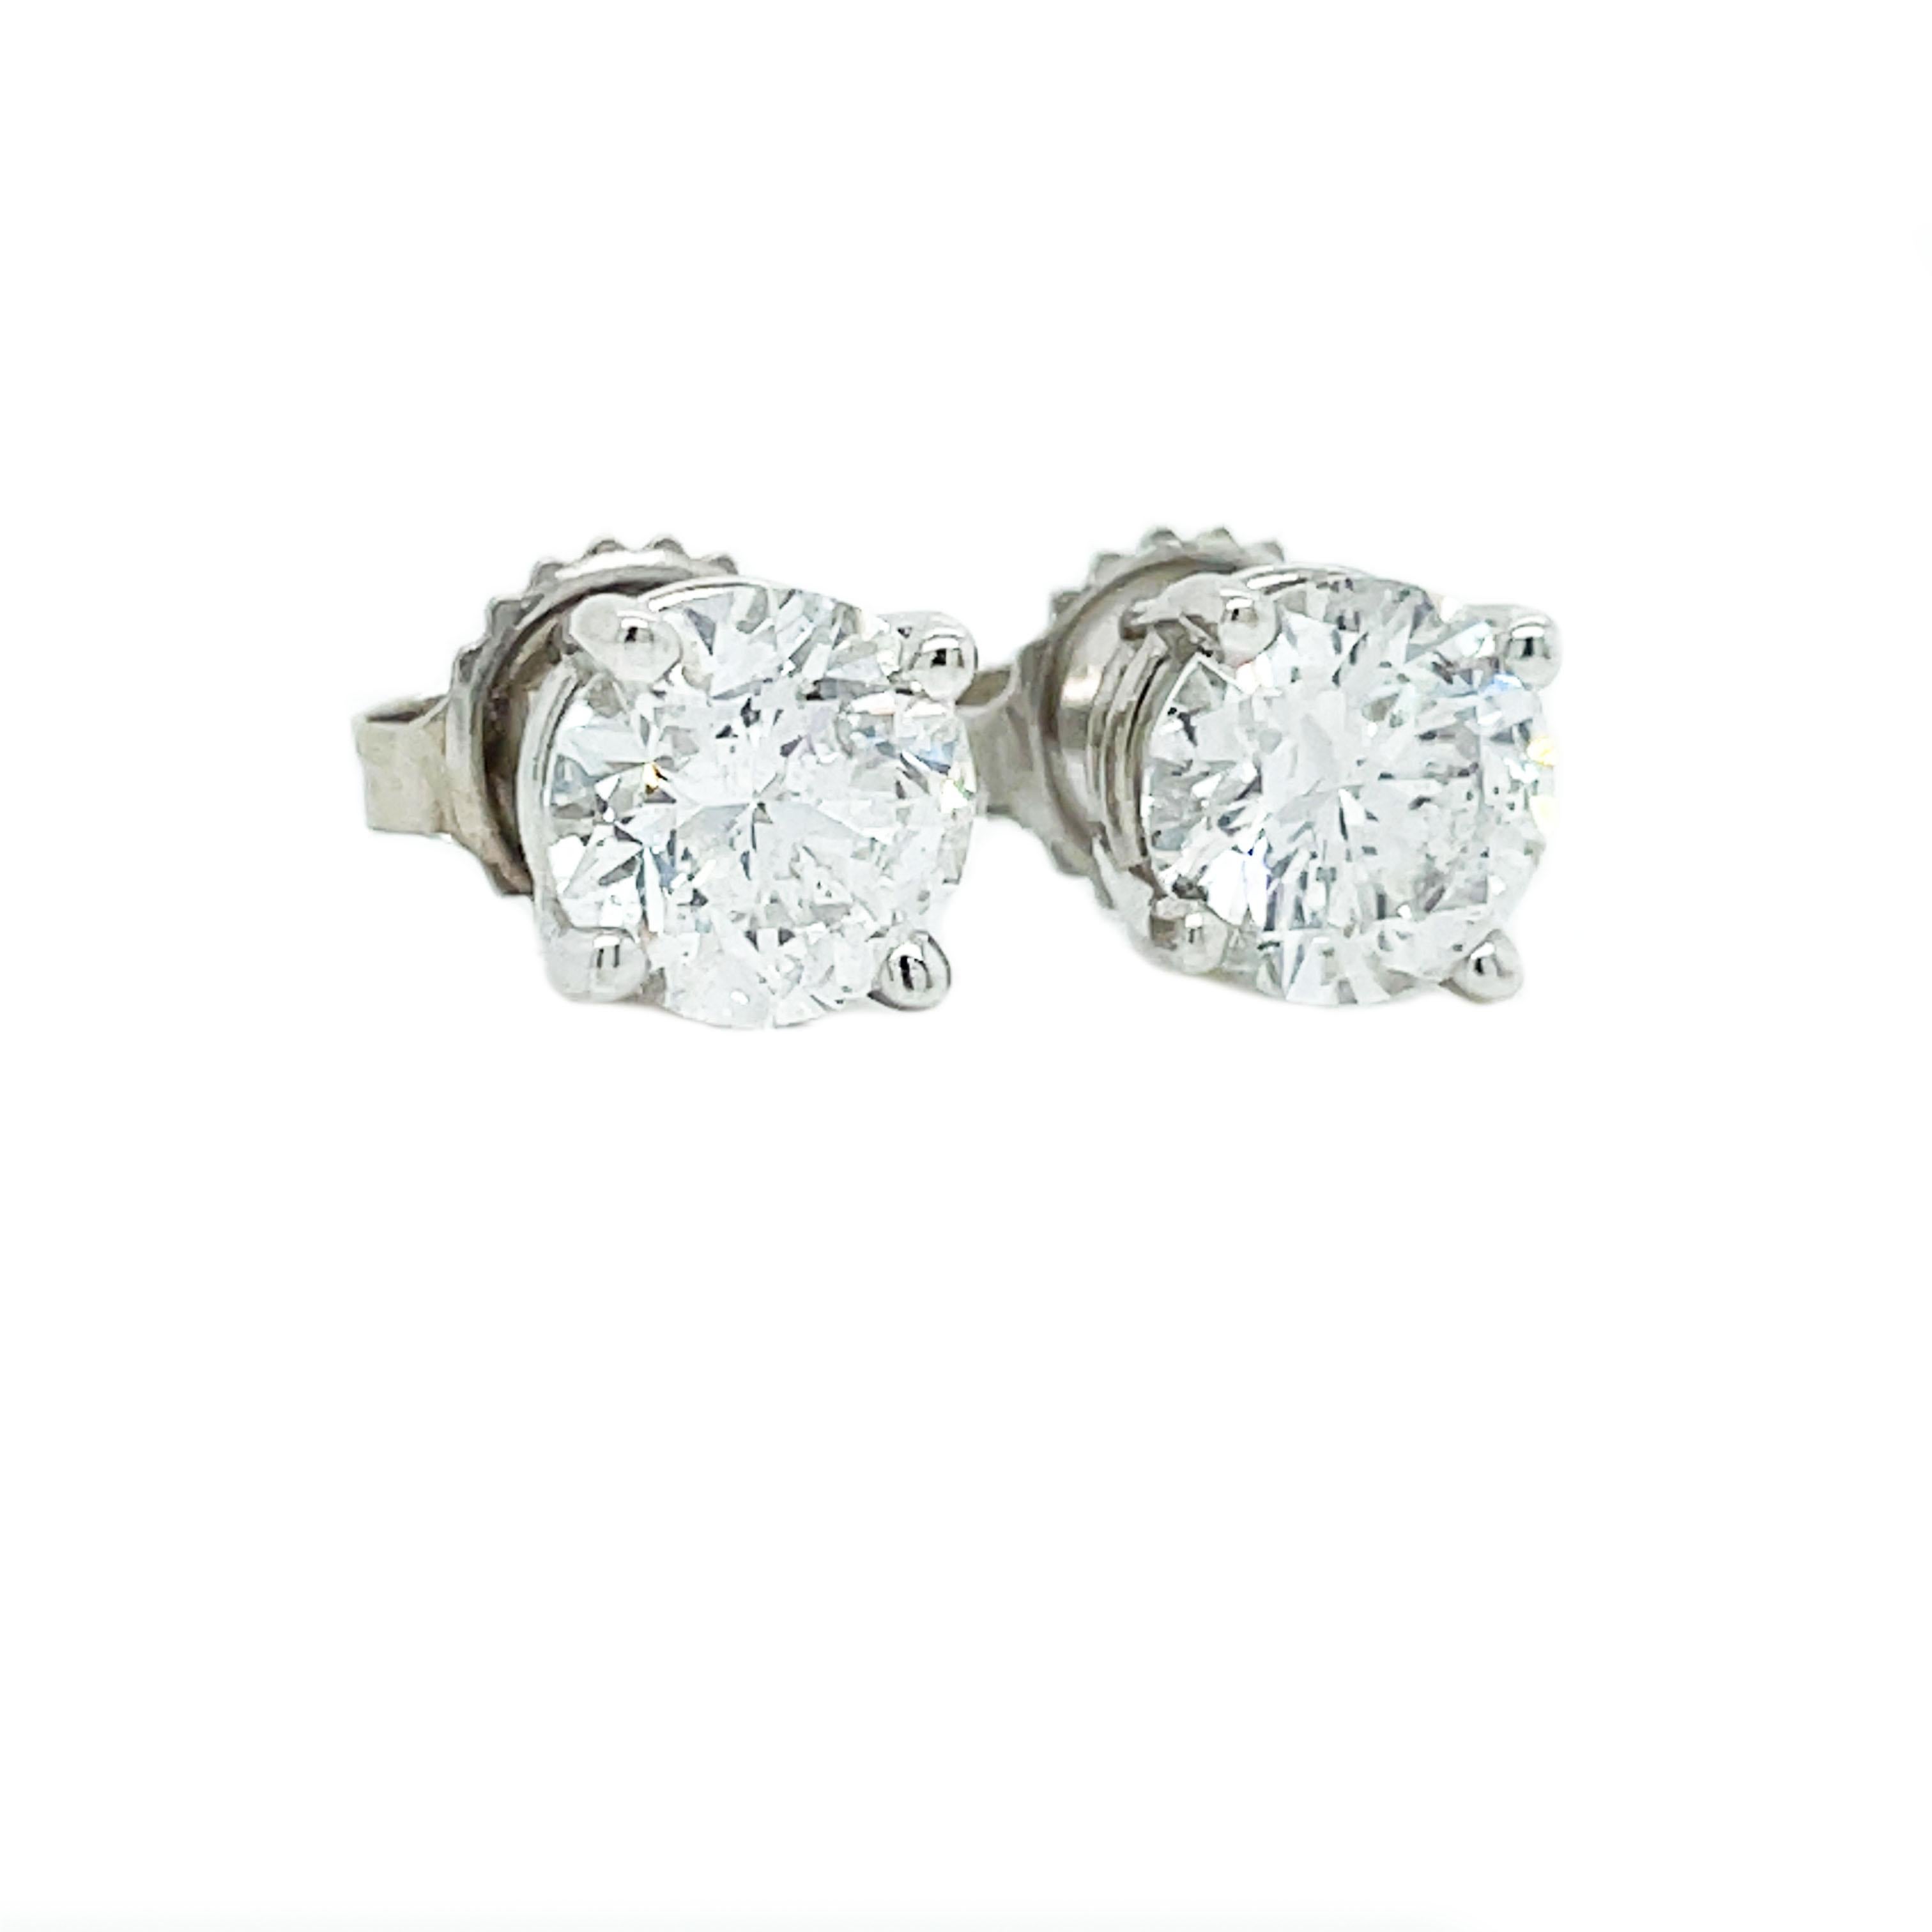 This is a gorgeous pair of 14K White Gold studs in a basket setting showcasing two bright white and dazzling round diamonds. What, you still don't have any?! It's time to change that! Every woman needs a pair of eye-catching diamond studs, and these